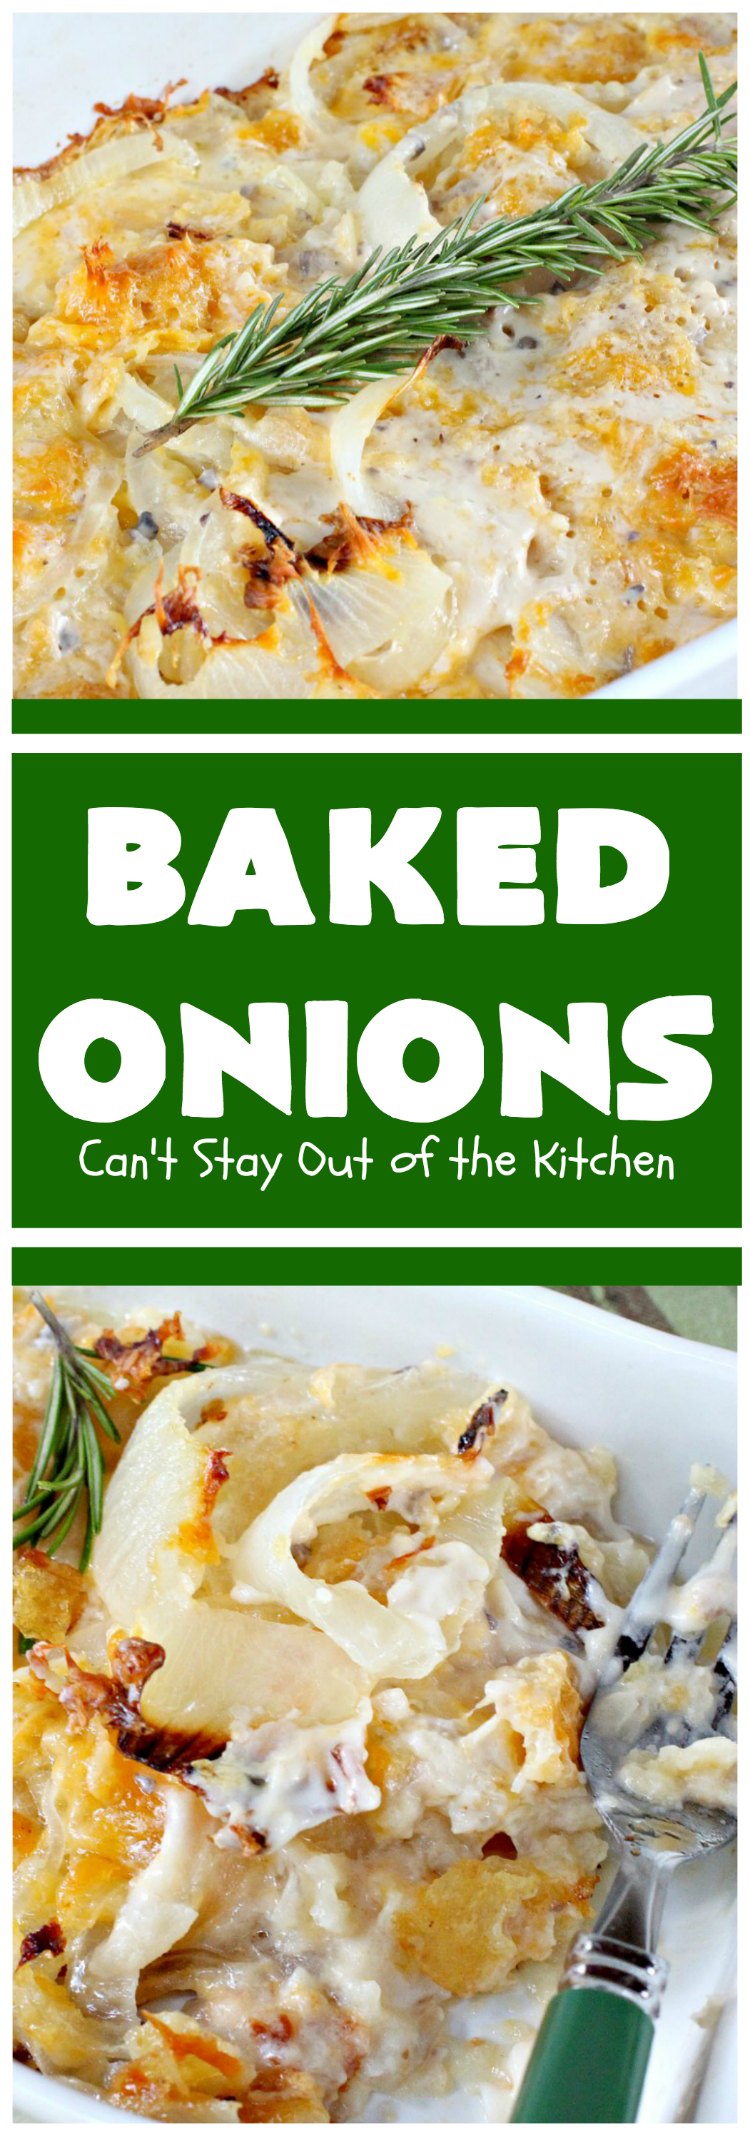 Baked Onions Can't Stay Out of the Kitchen